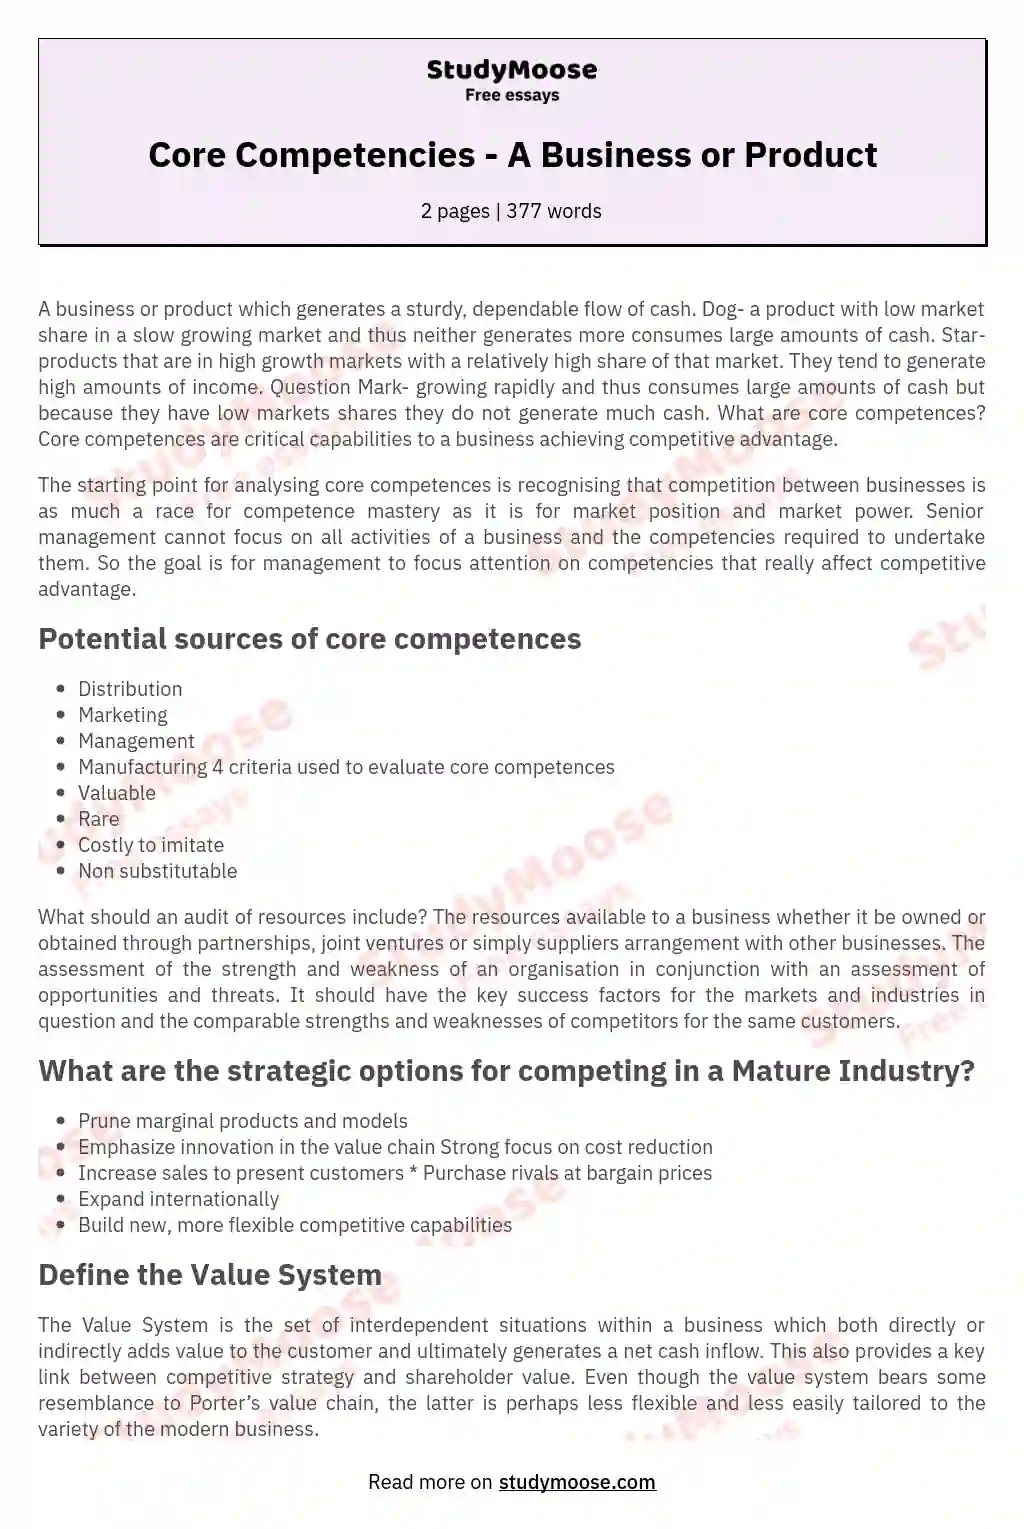 Core Competencies - A Business or Product essay